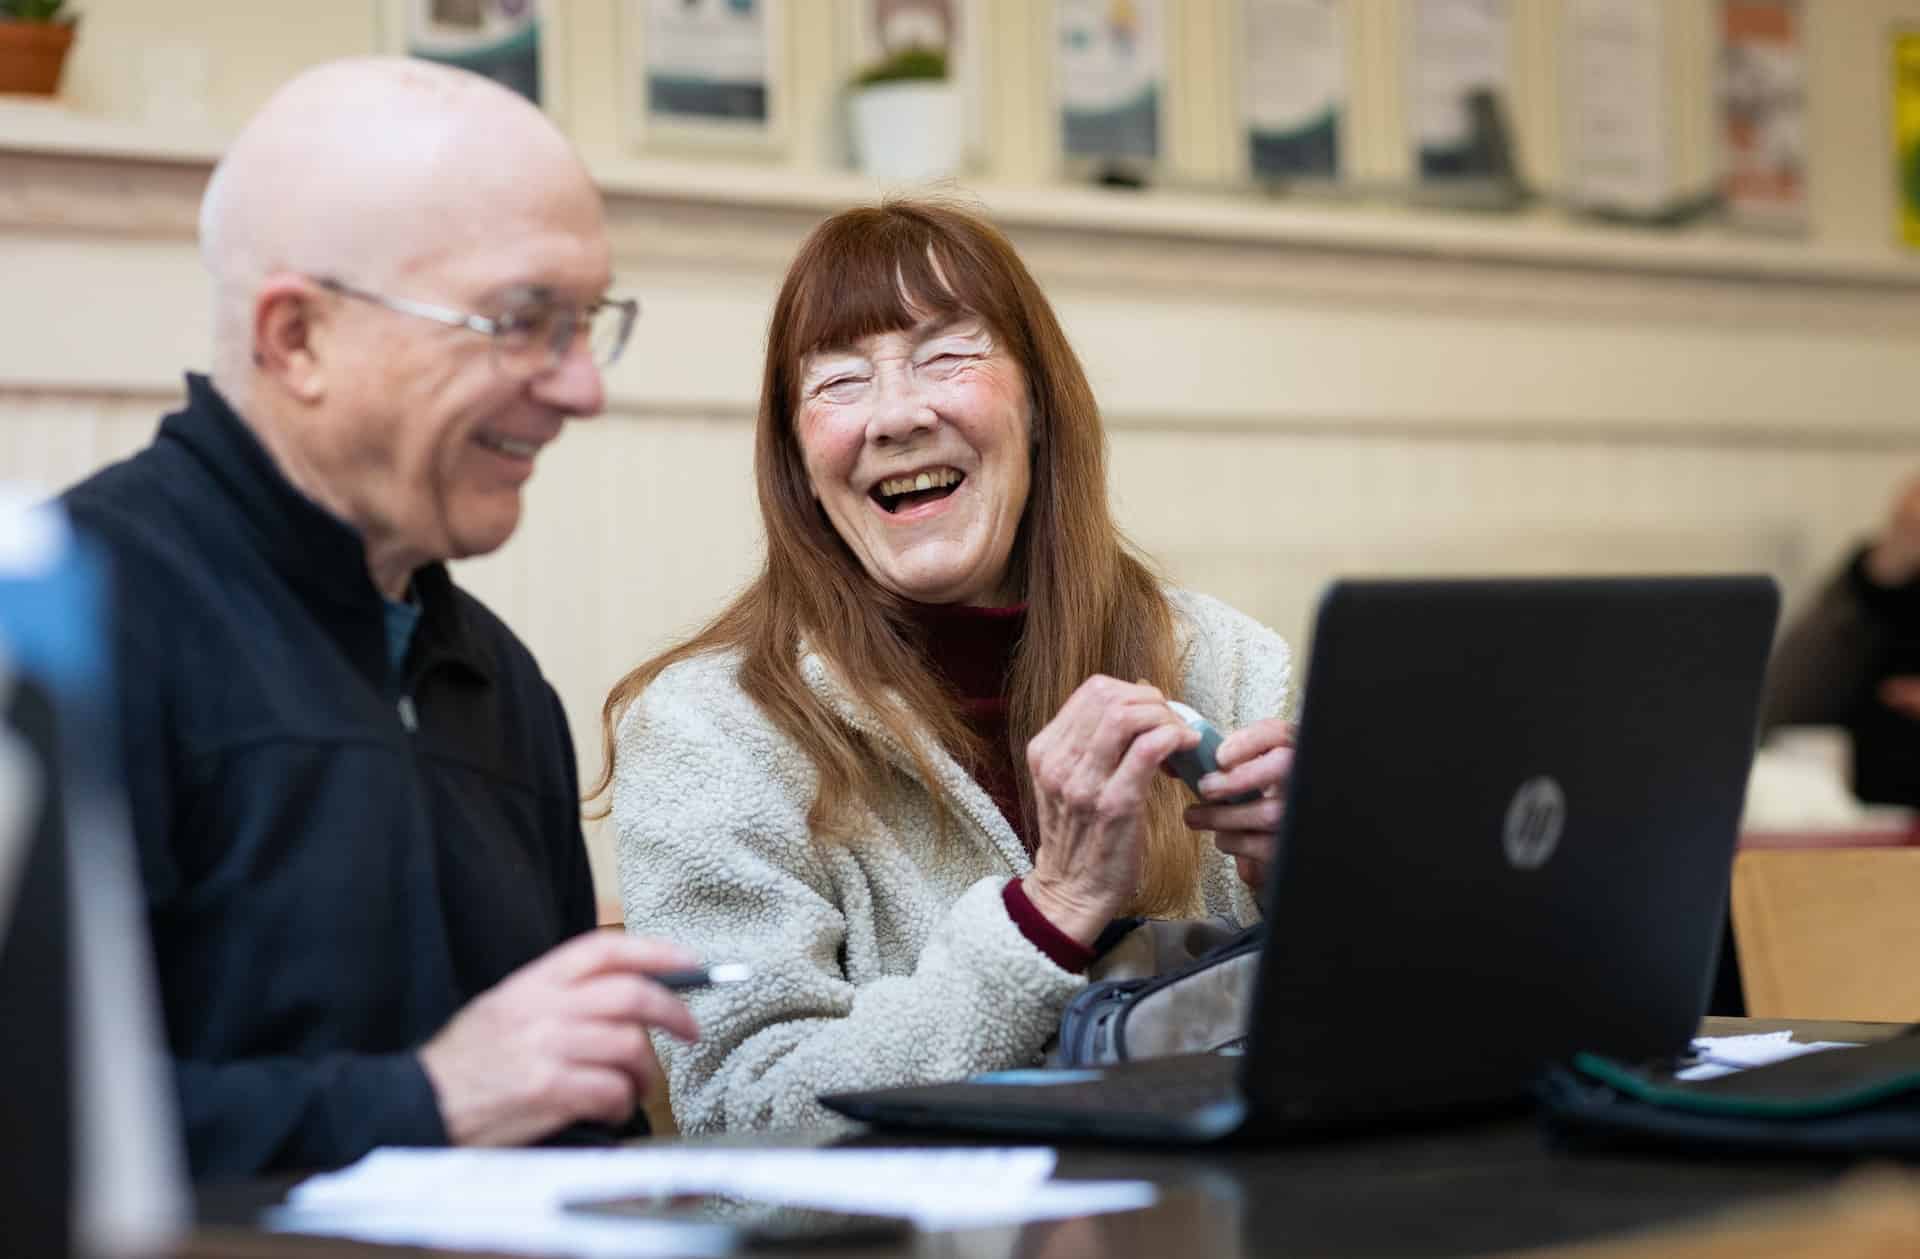 two older people sitting in front of laptops